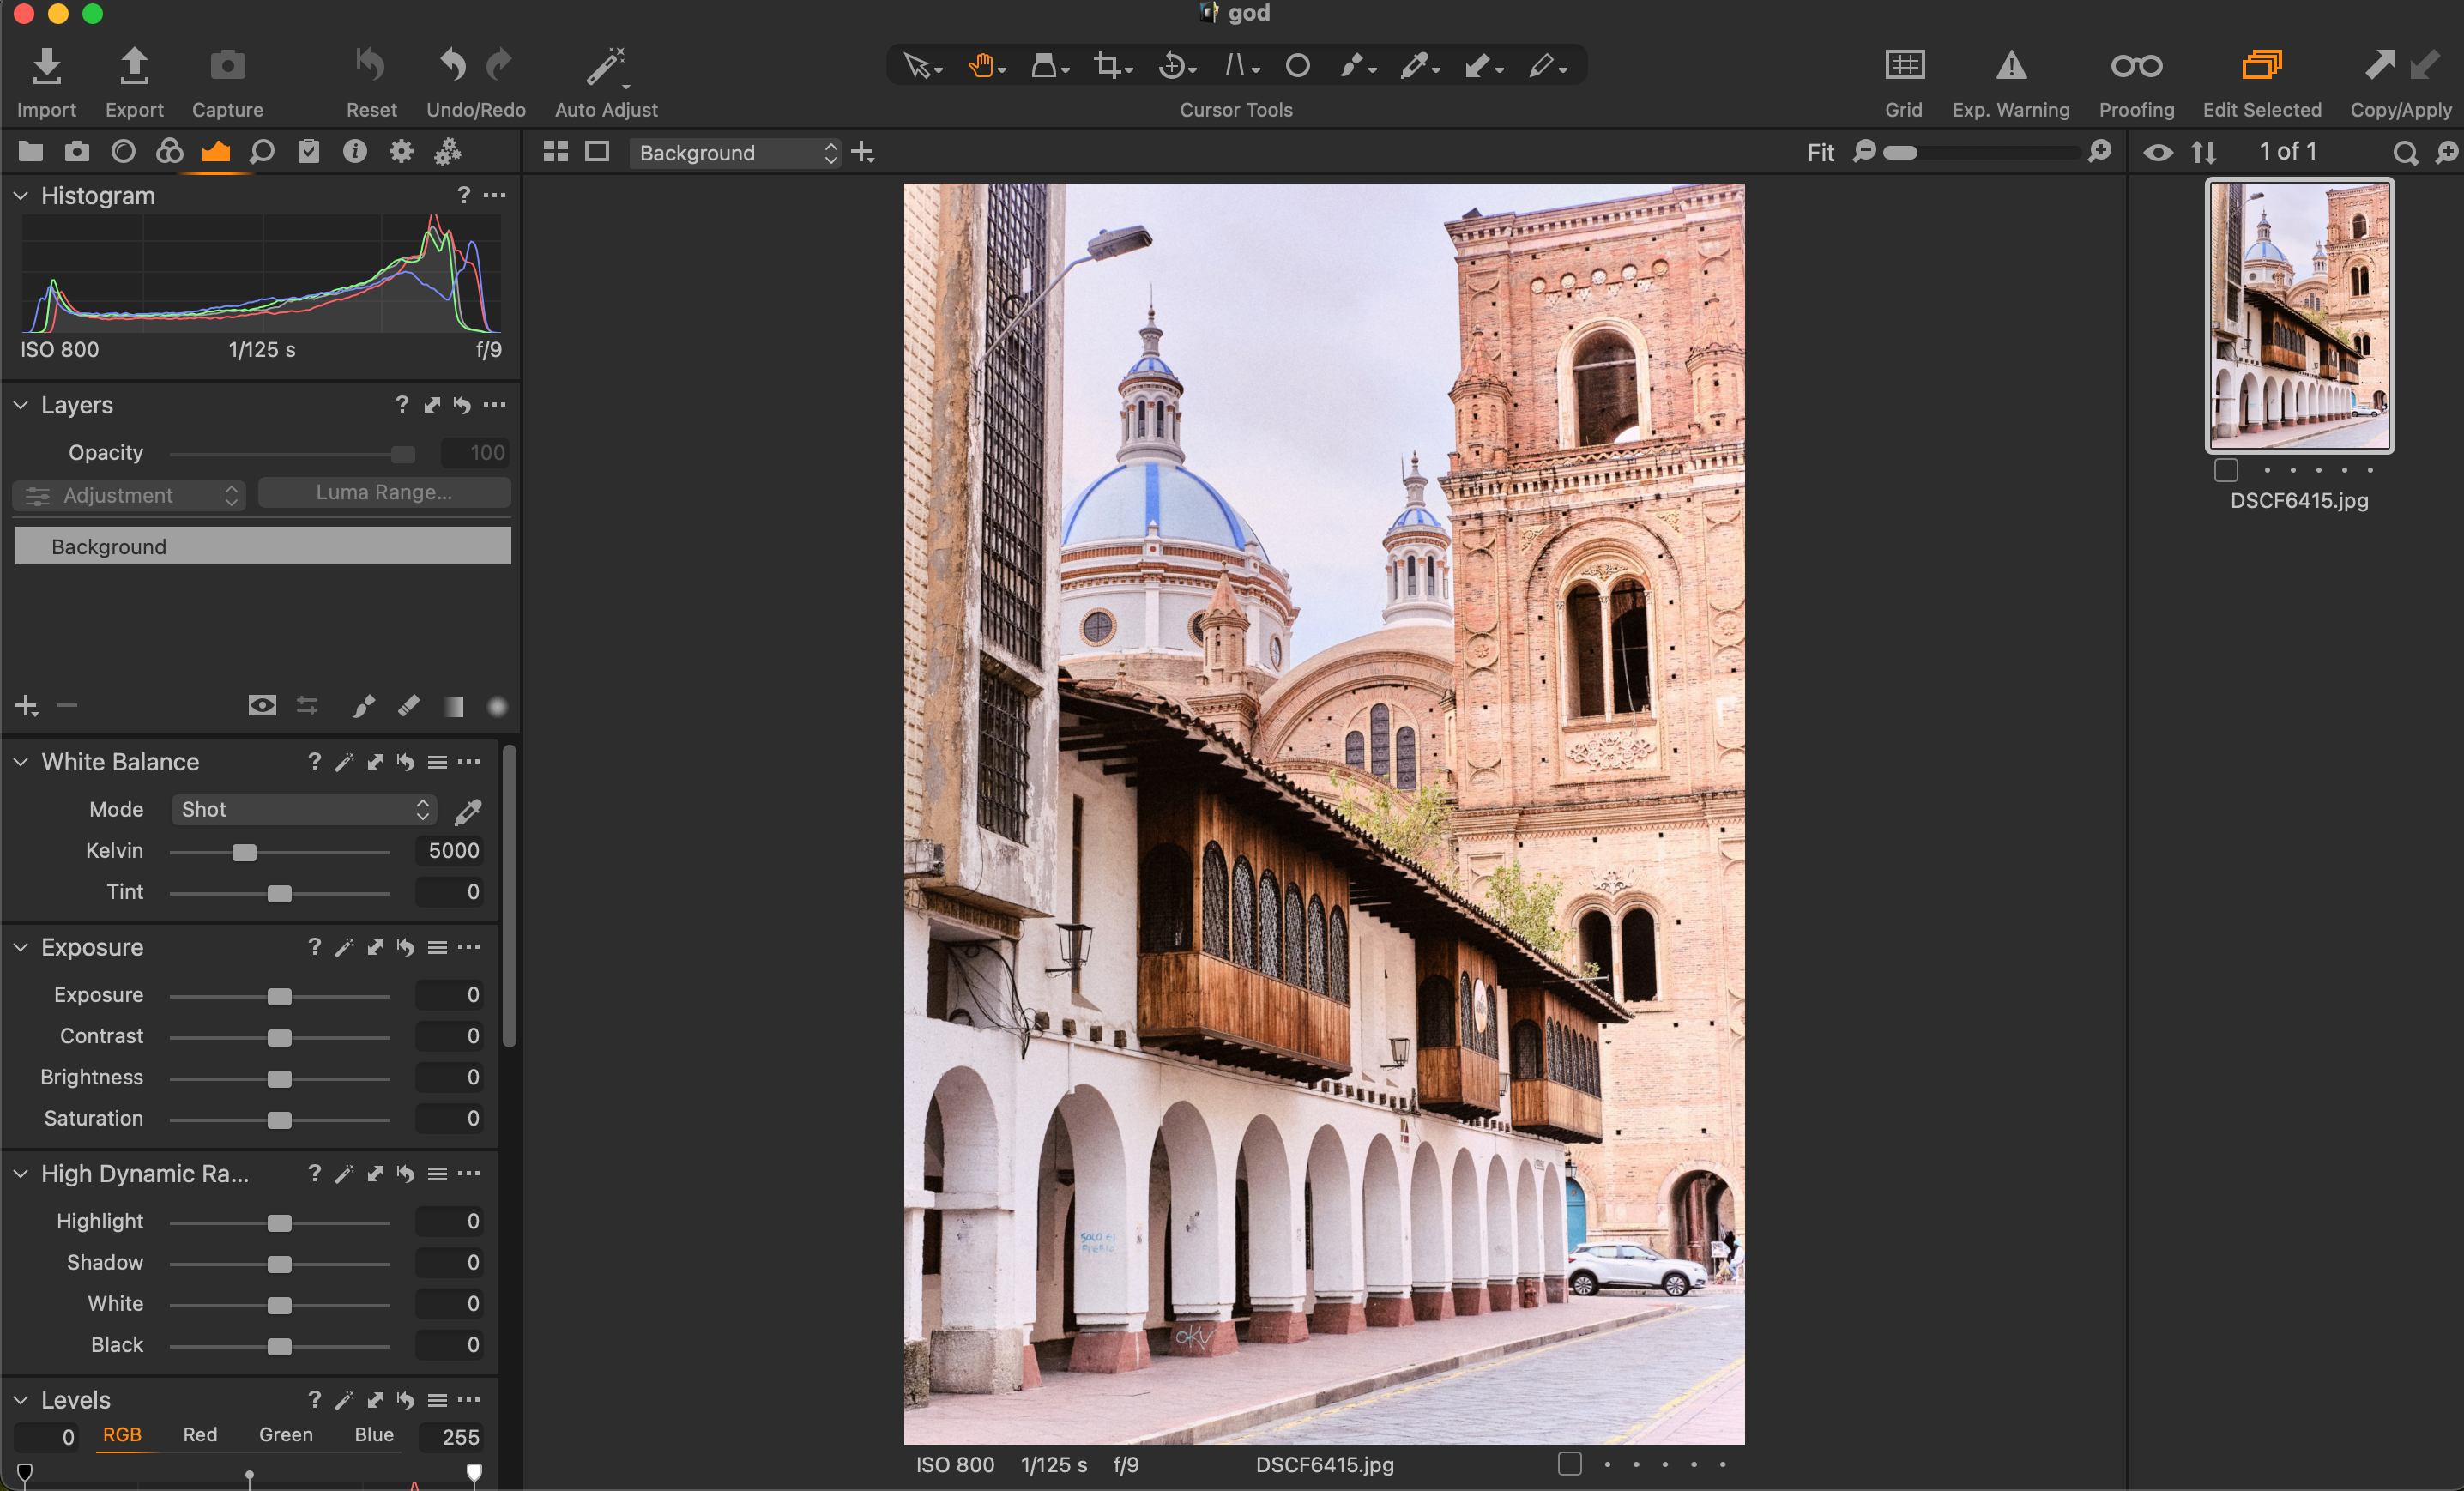 This Simple Photography Tip Will Make You a Much Better Editor